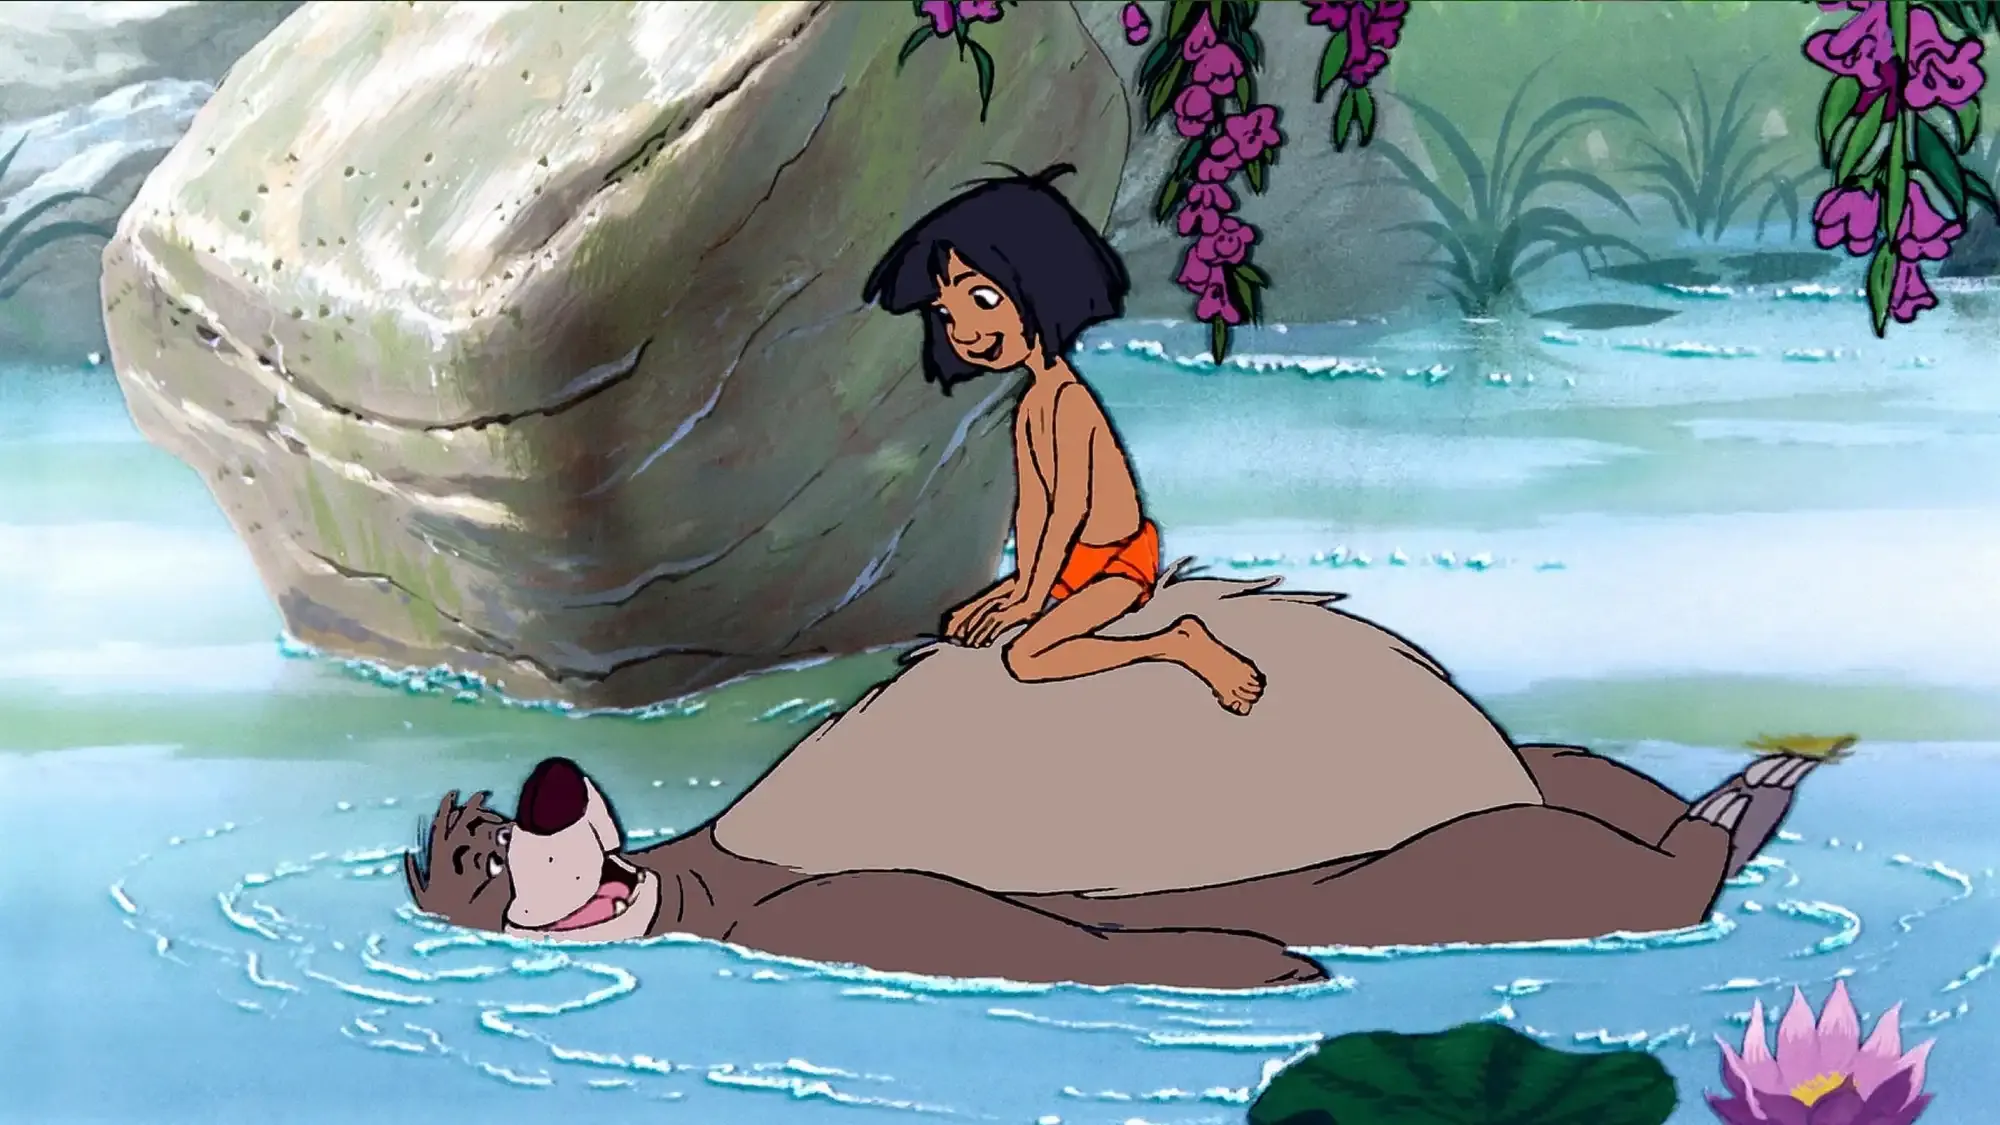 The Jungle Book movie review